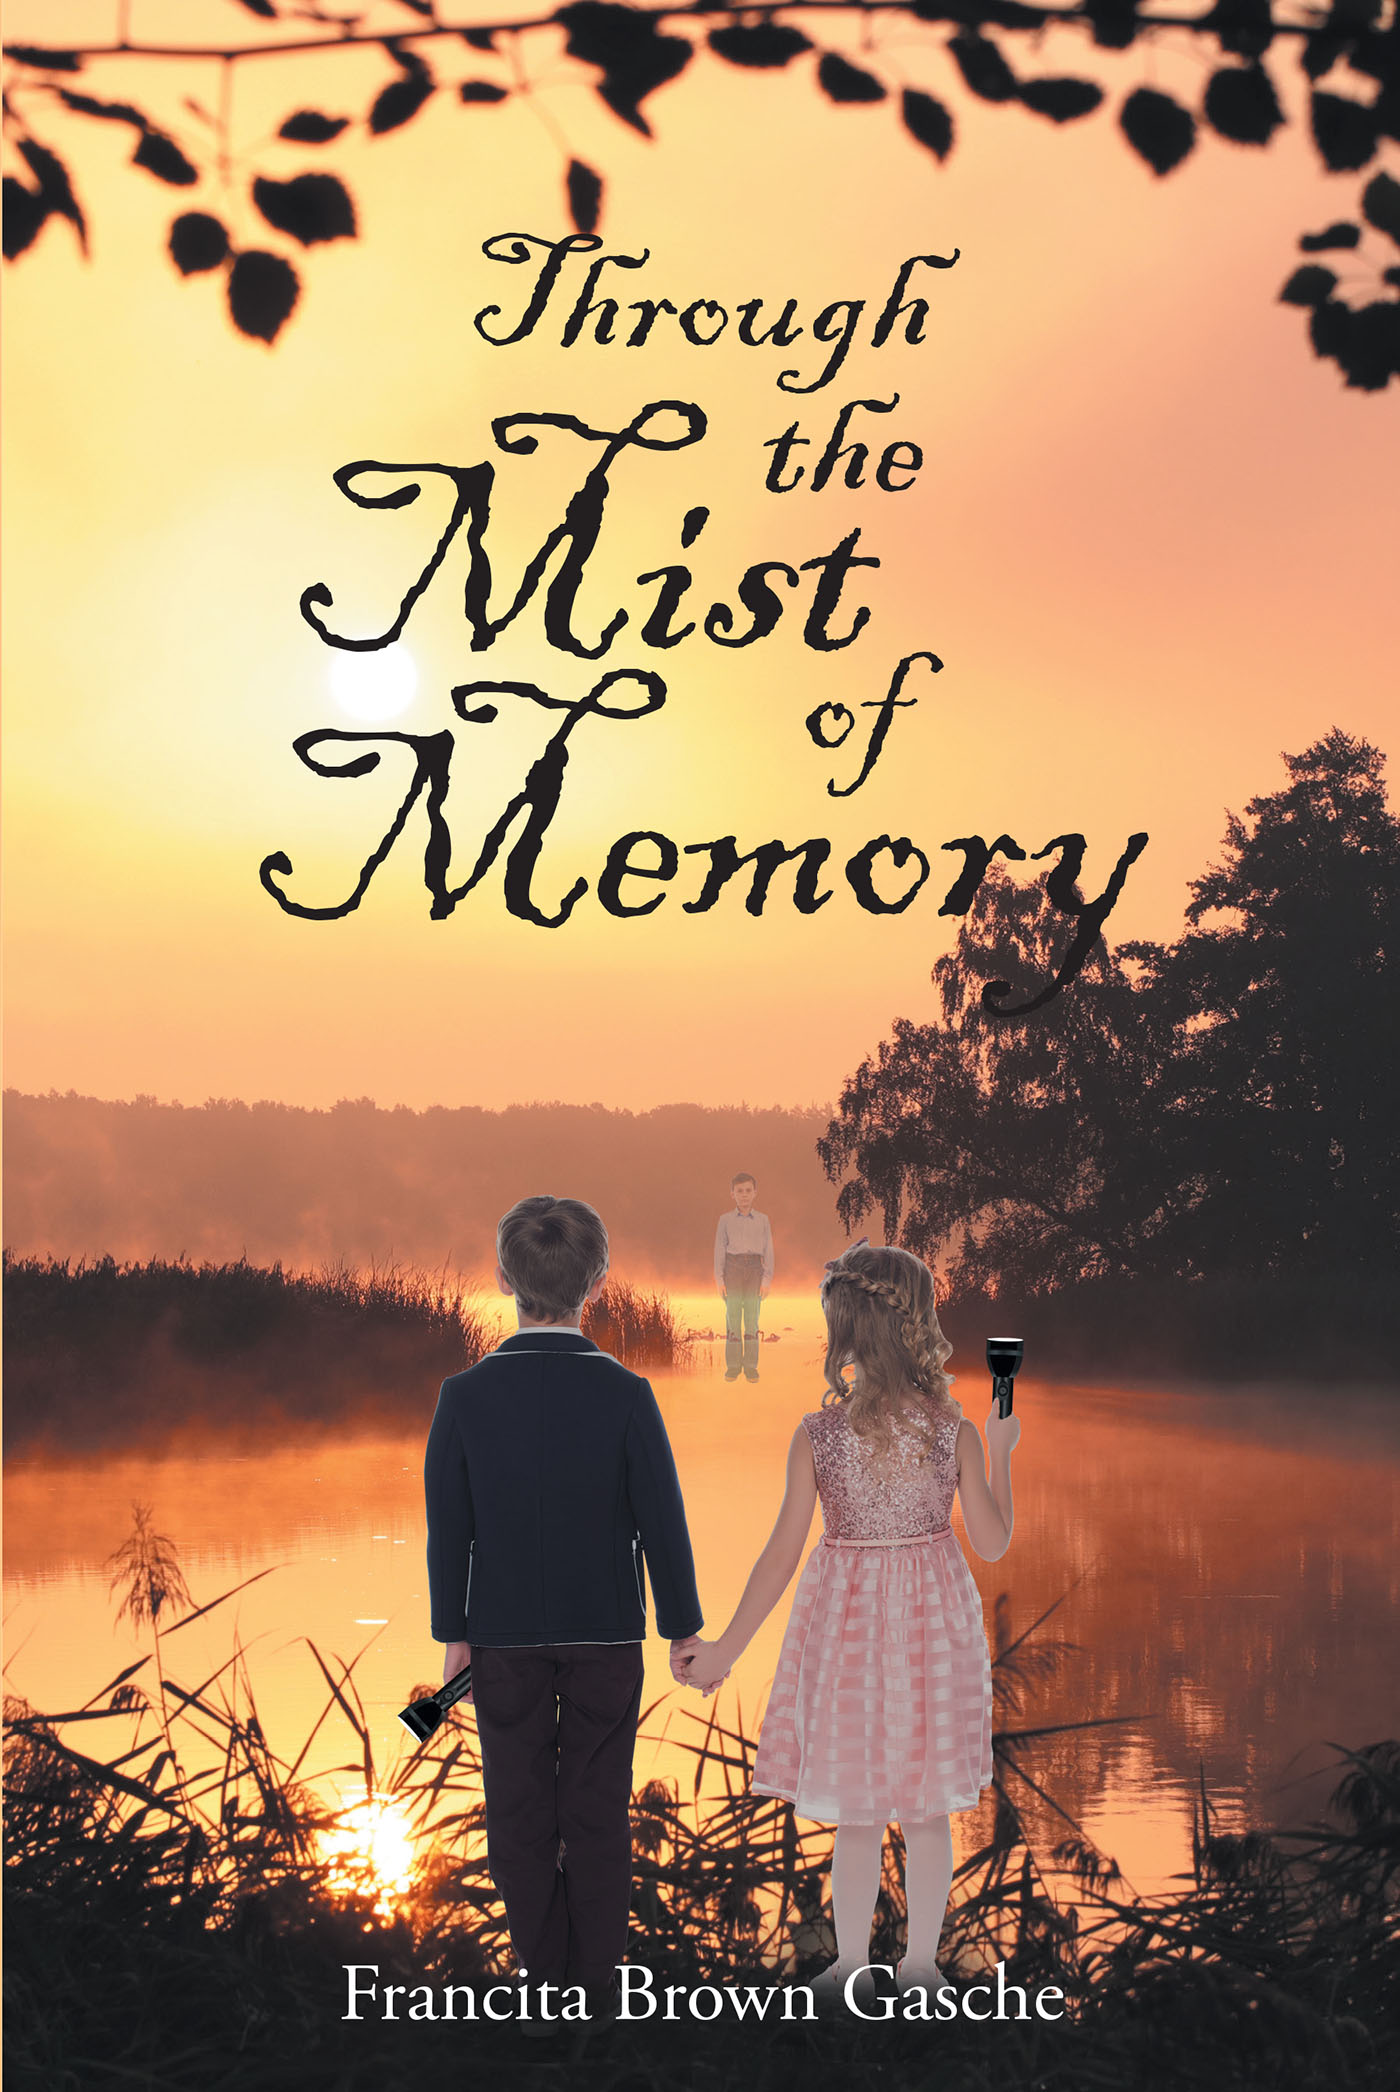 Francita Brown Gasche’s Newly Released "Through the Mist of Memory" is a Fascinating Examination of the Author’s Spiritual Journey